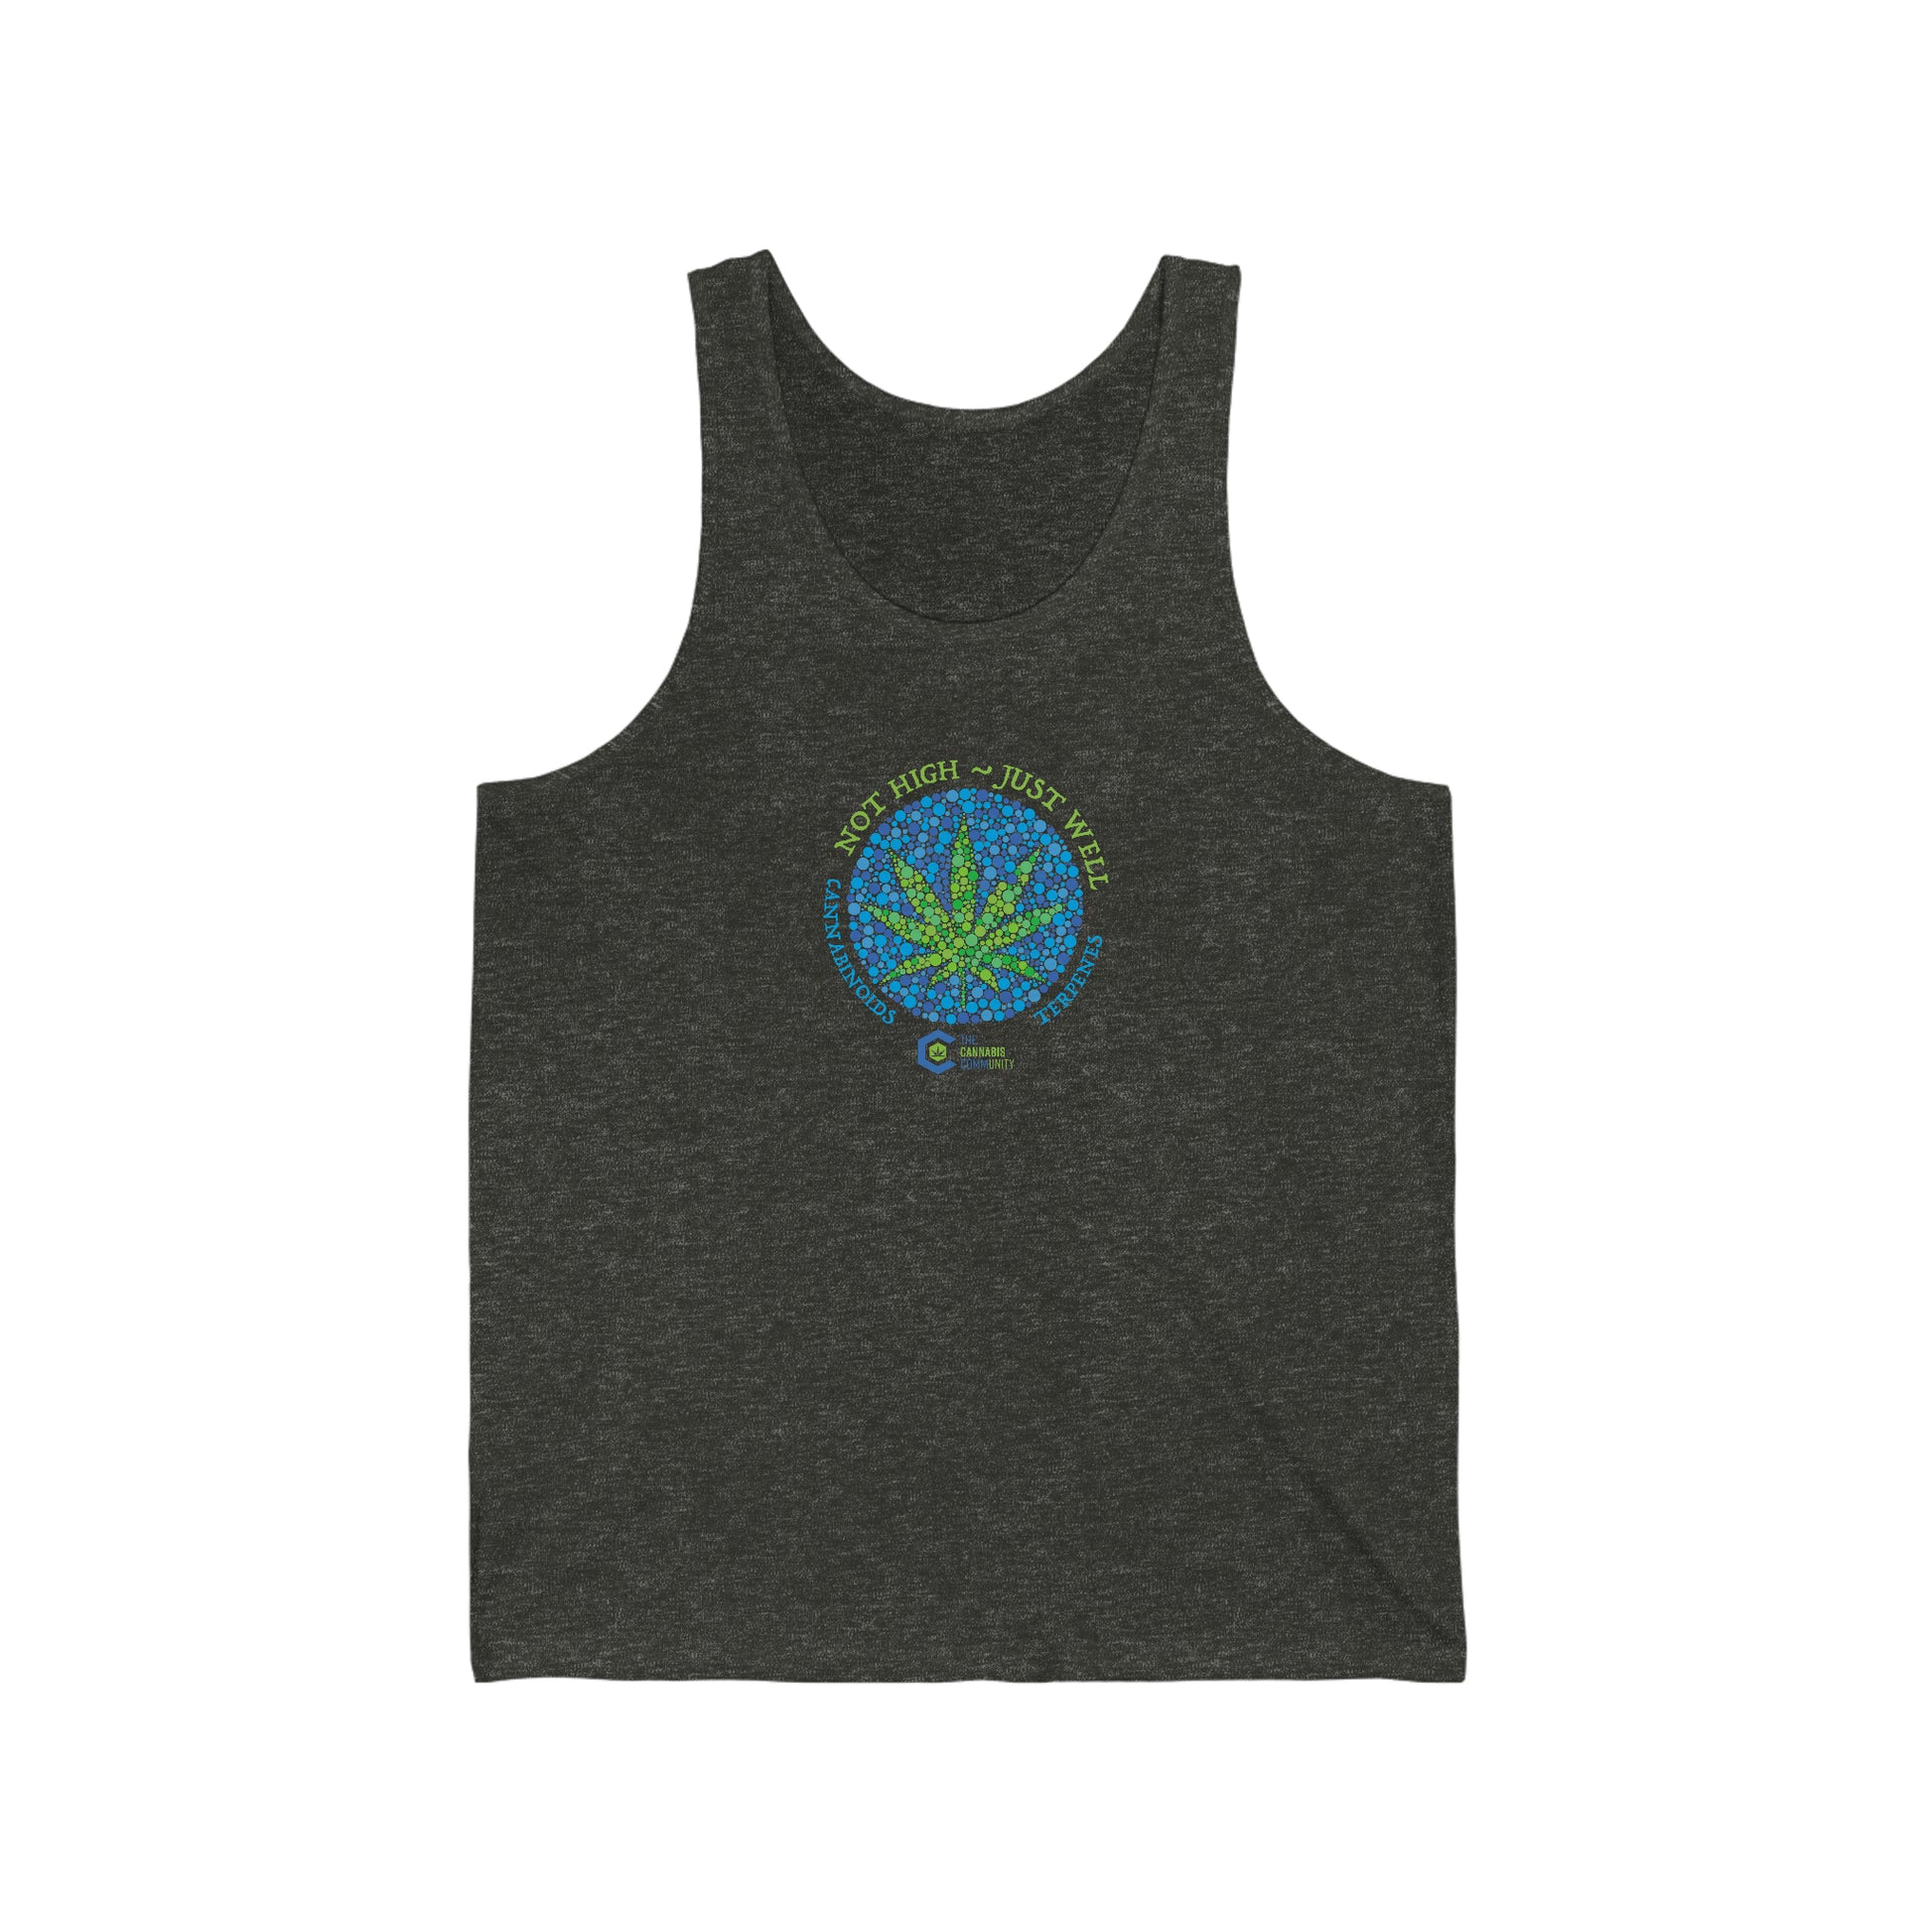 a Not High, Just Well Cannabis Jersey Tank with a marijuana leaf on it.